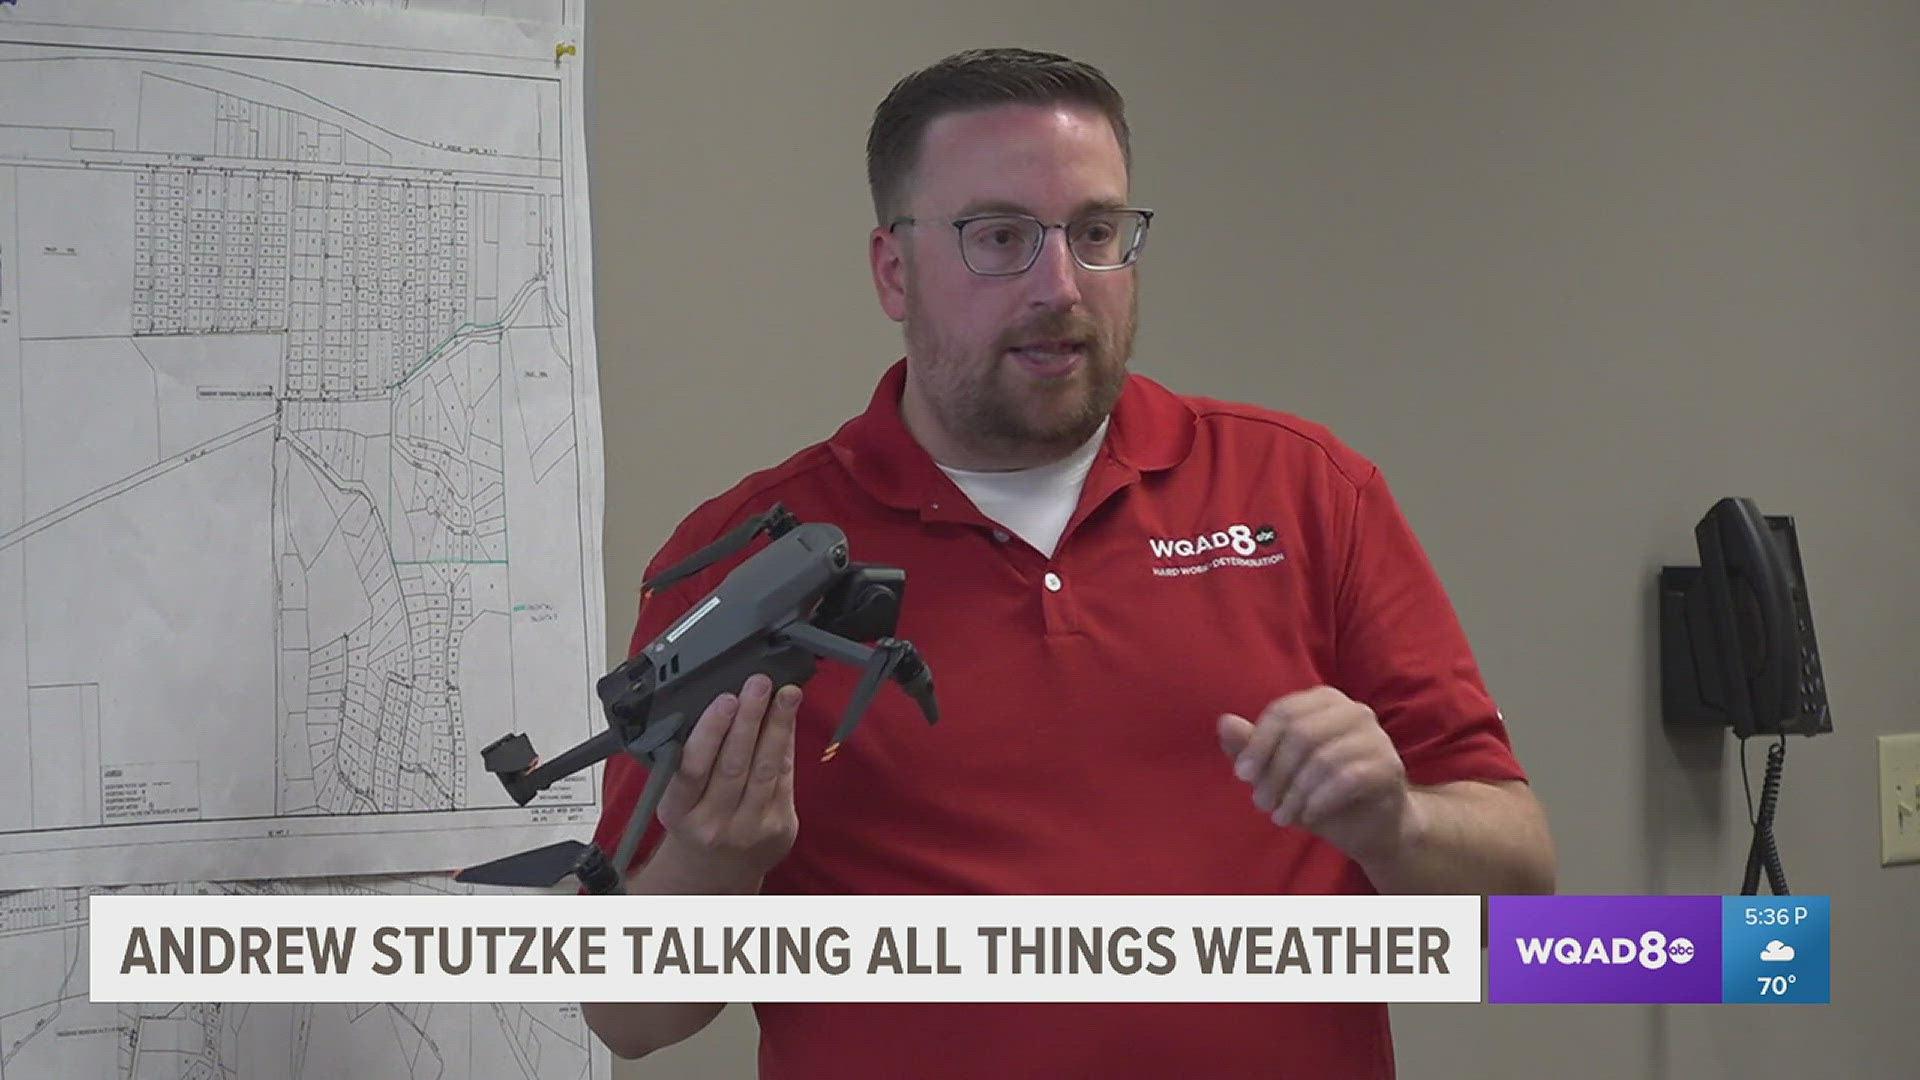 He talked all things weather from prediction techniques to storm chasing adventures.